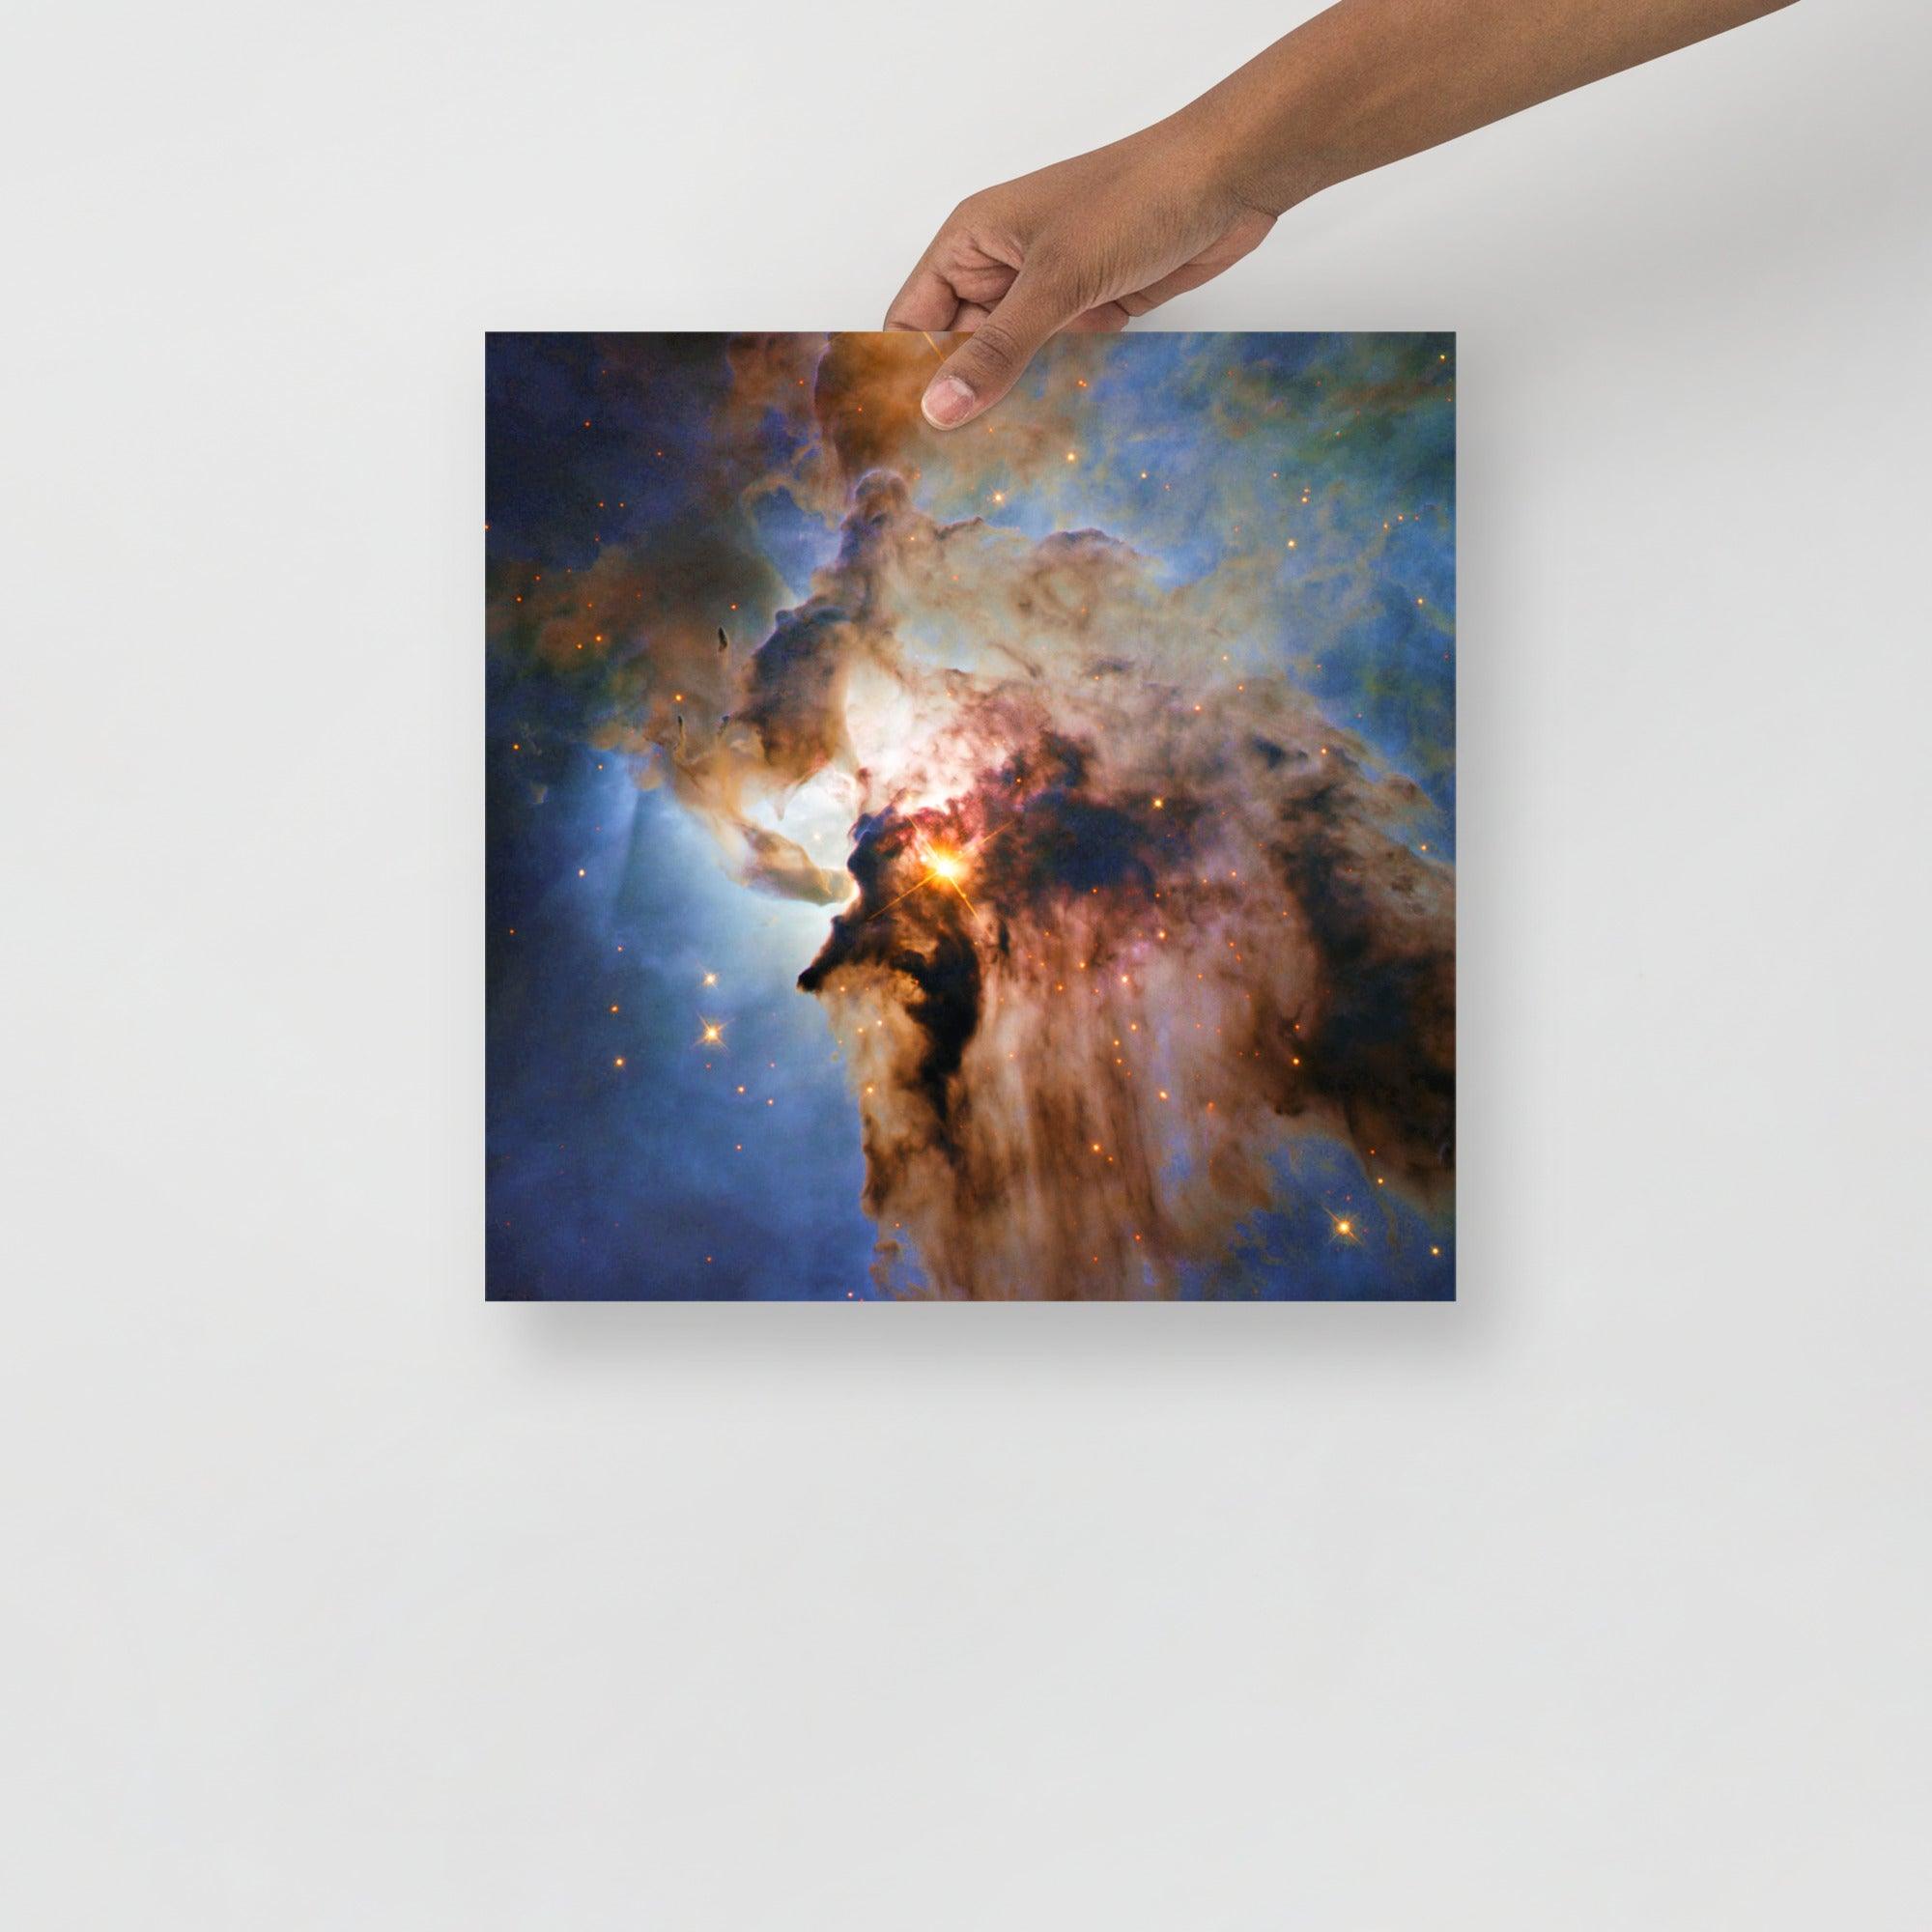 A Lagoon Nebula by Hubble Space Telescope poster on a plain backdrop in size 14x14”.